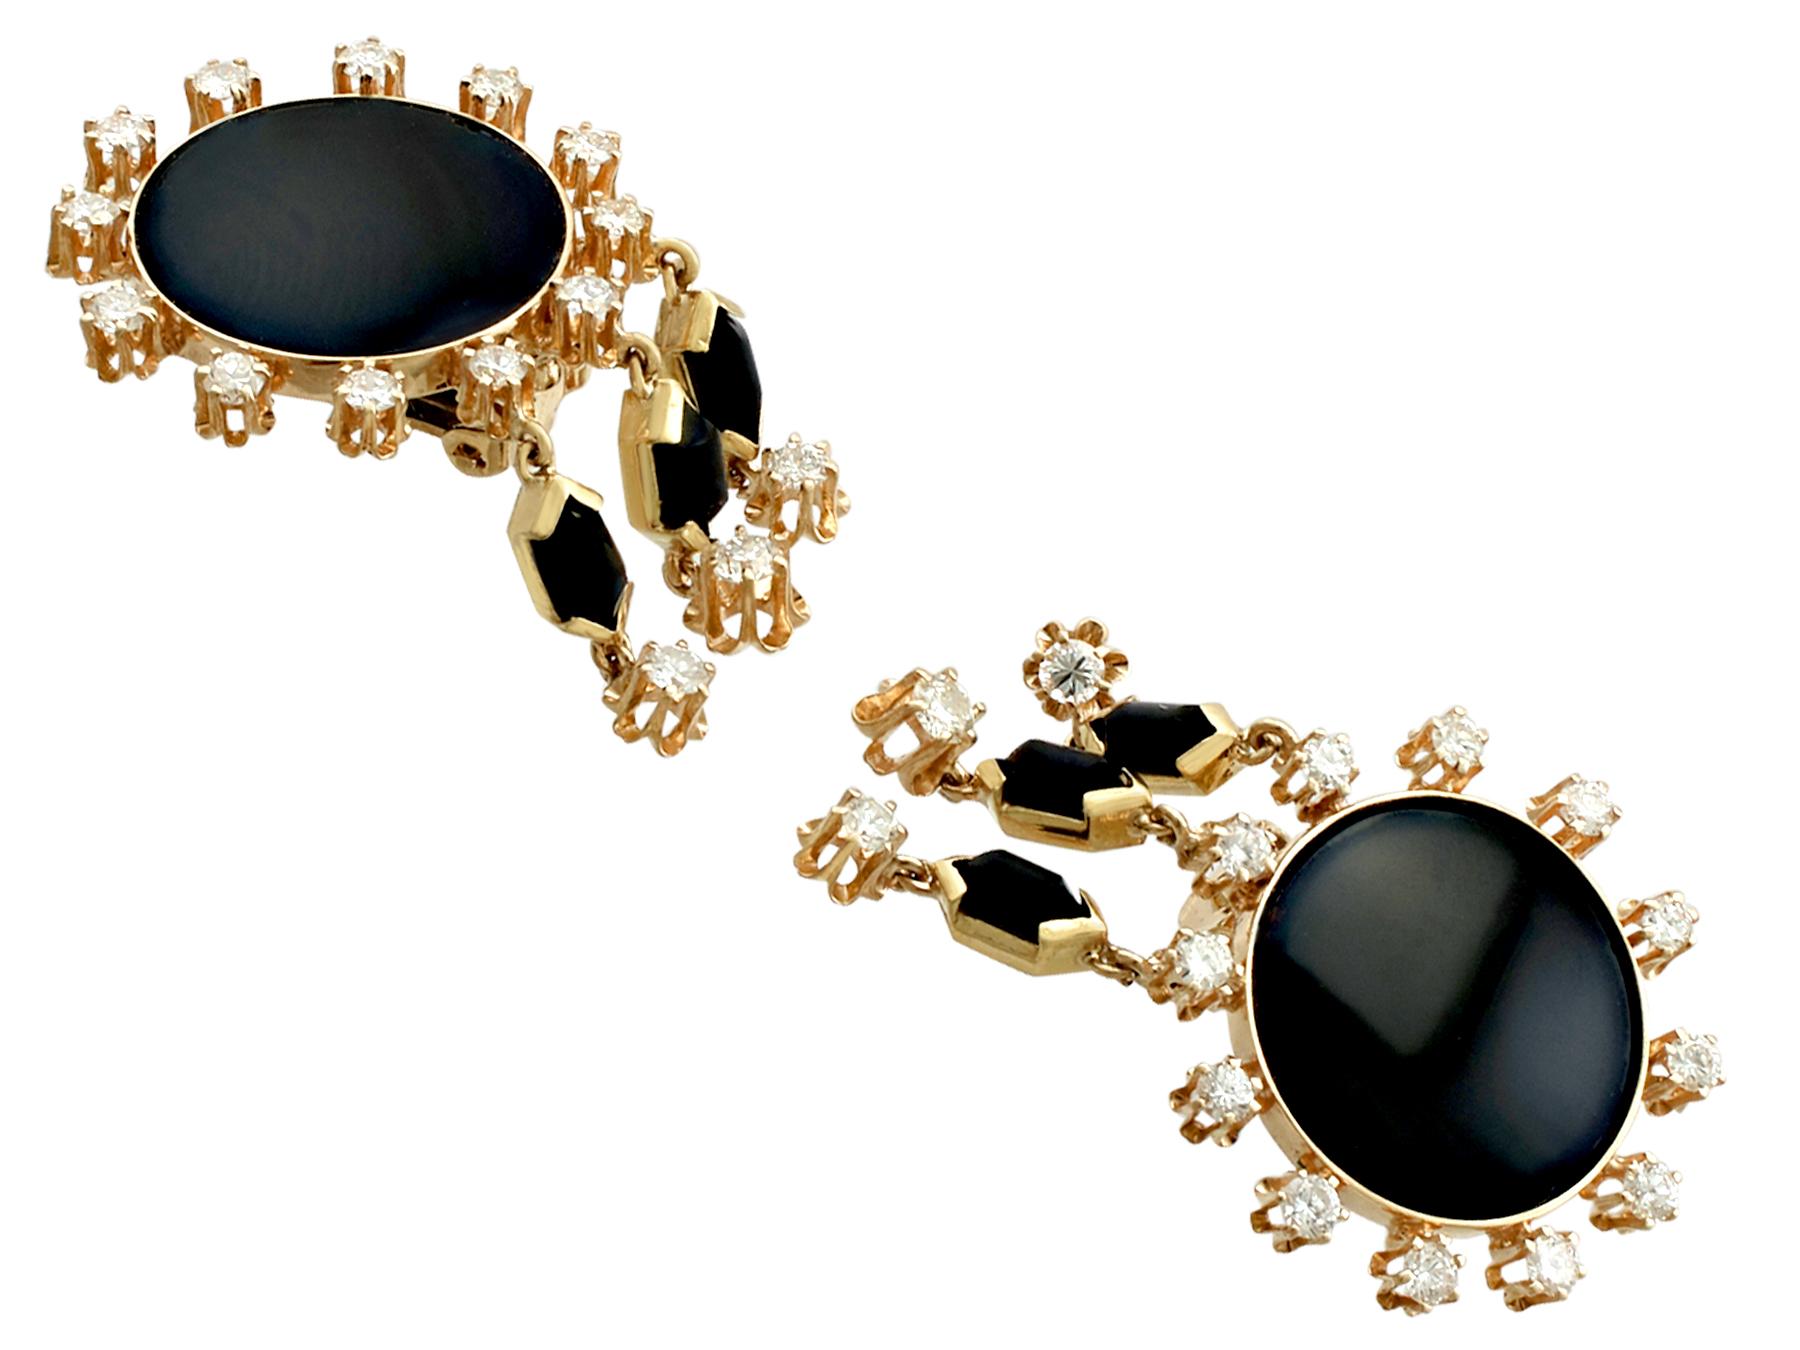 A stunning, fine and impressive pair of vintage black onyx and 1.40 carat diamond, 14 karat yellow gold Art Deco style drop earrings; part of our diverse vintage jewelry and estate jewelry collections

These stunning diamond and onyx earrings have